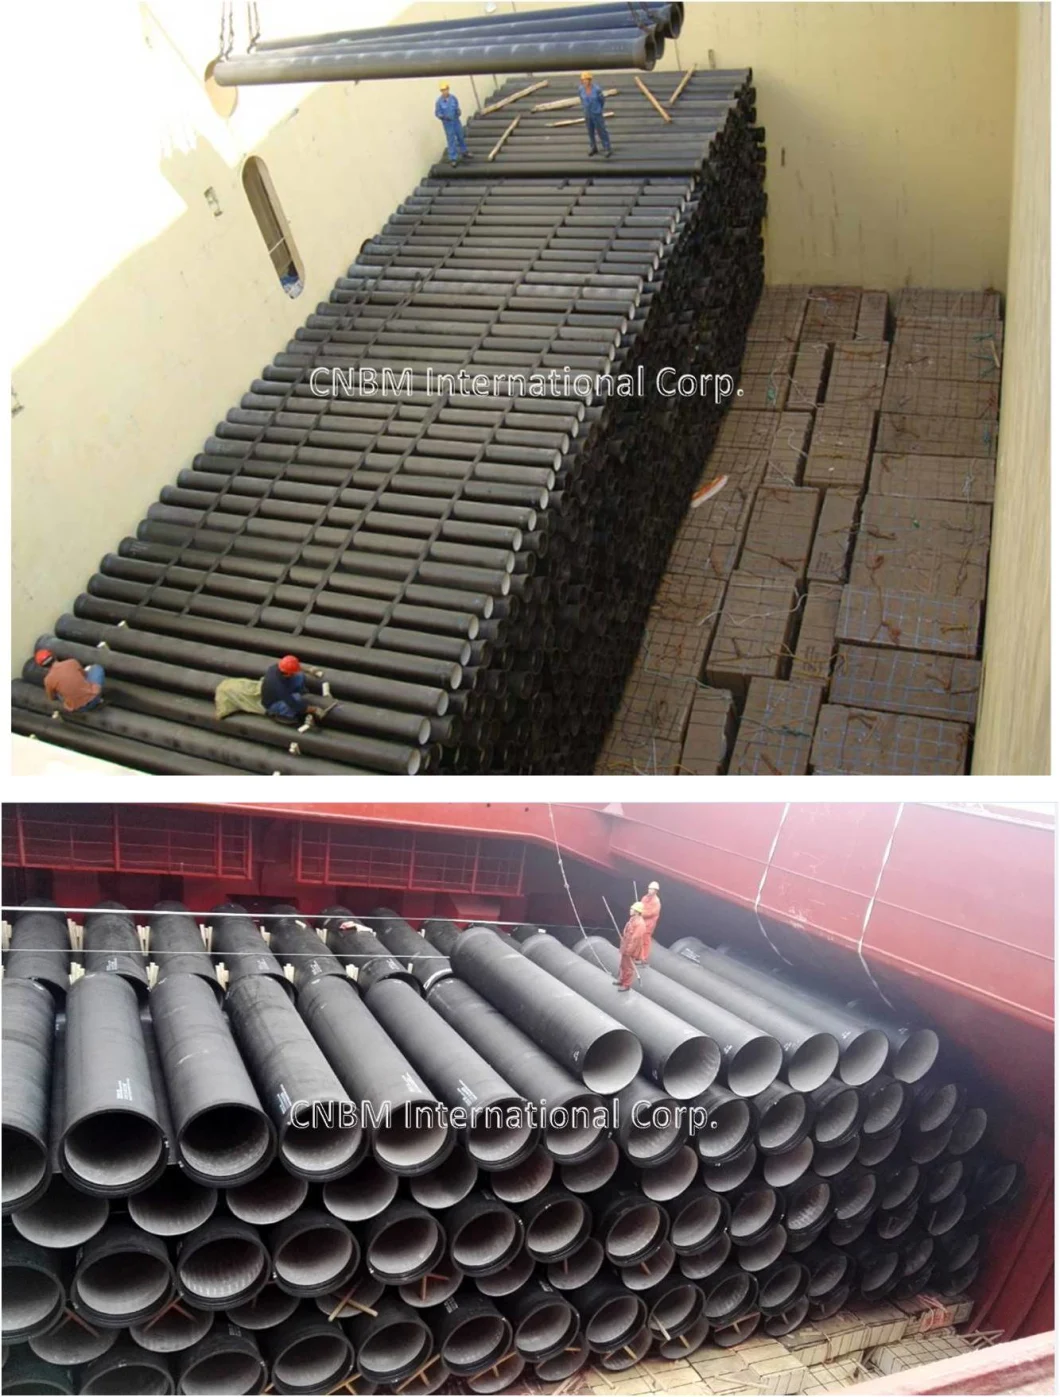 Centrifugal Ductile Iron Cast Pipe Cement Lining